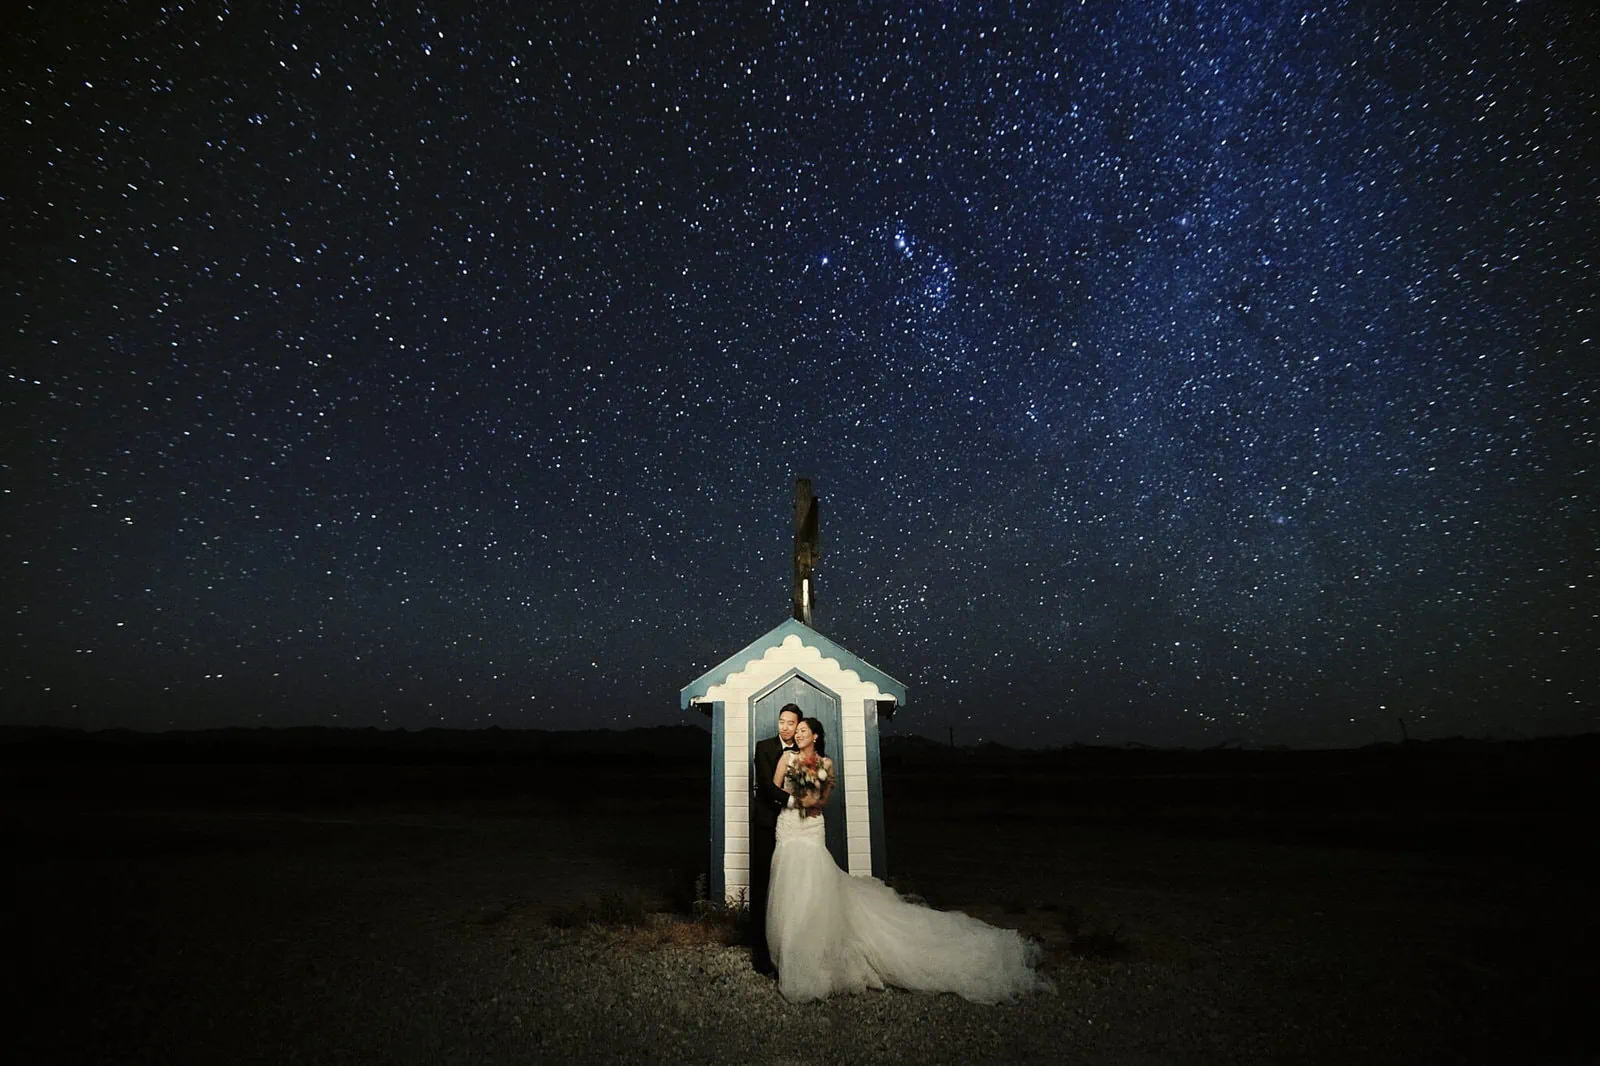 Queenstown New Zealand Elopement Wedding Photographer - A stunning starry night shoot capturing the enchanting moment of a bride and groom under a mesmerizing starry sky, perfect for our portfolio.